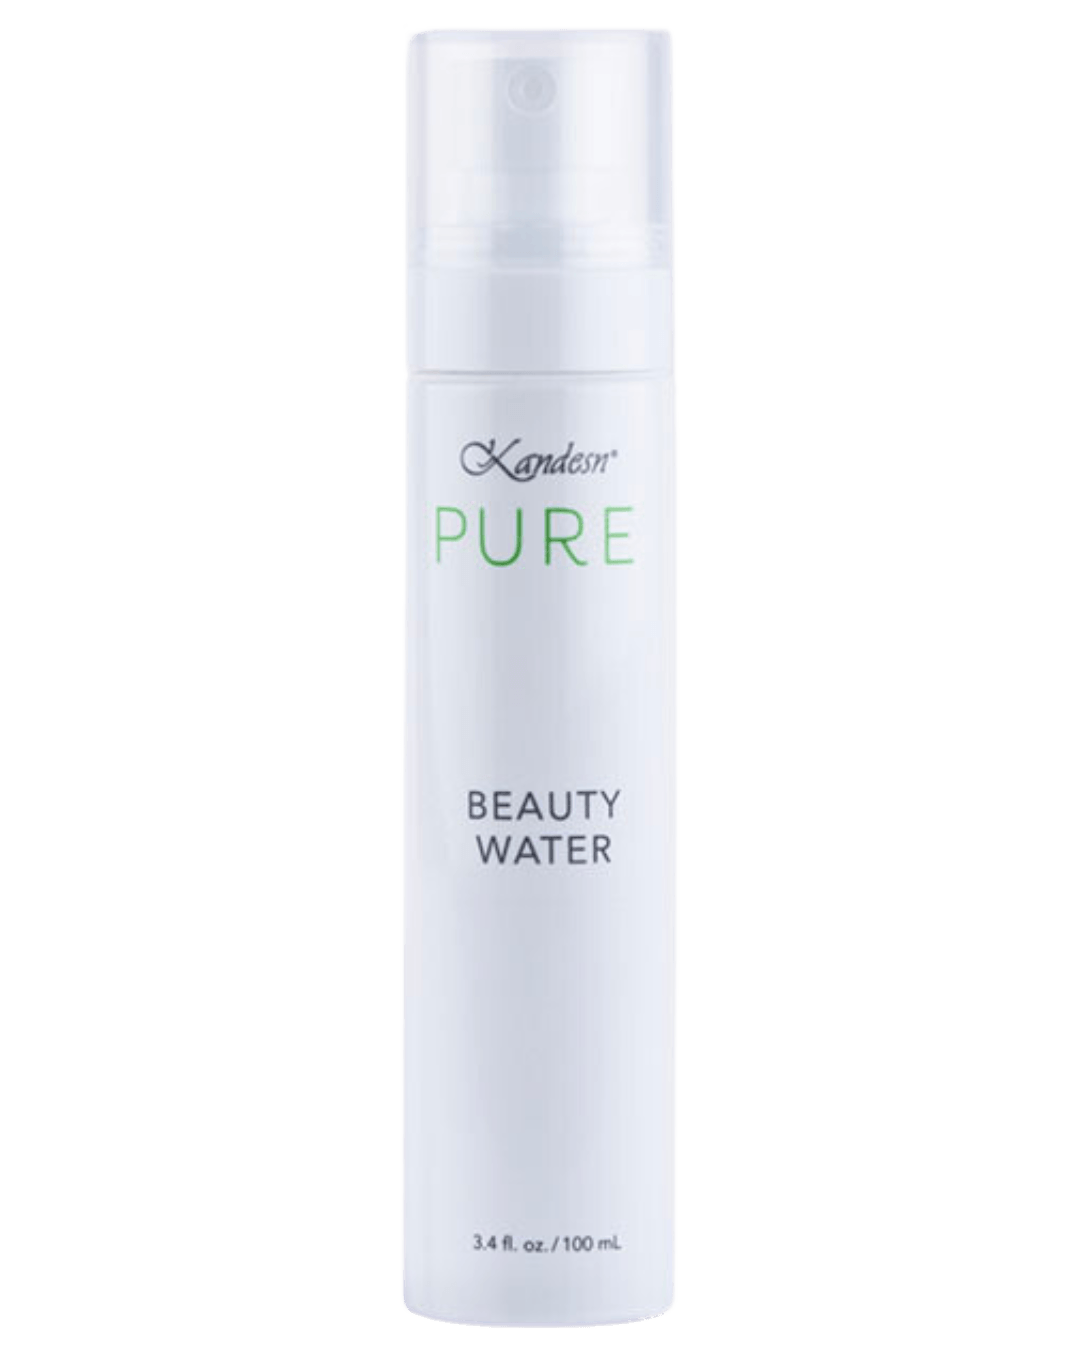 Daily Vanity Beauty Awards 2024 Best  Sunrider Singapore Kandesn® Pure Beauty Water Voted By Beauty Experts